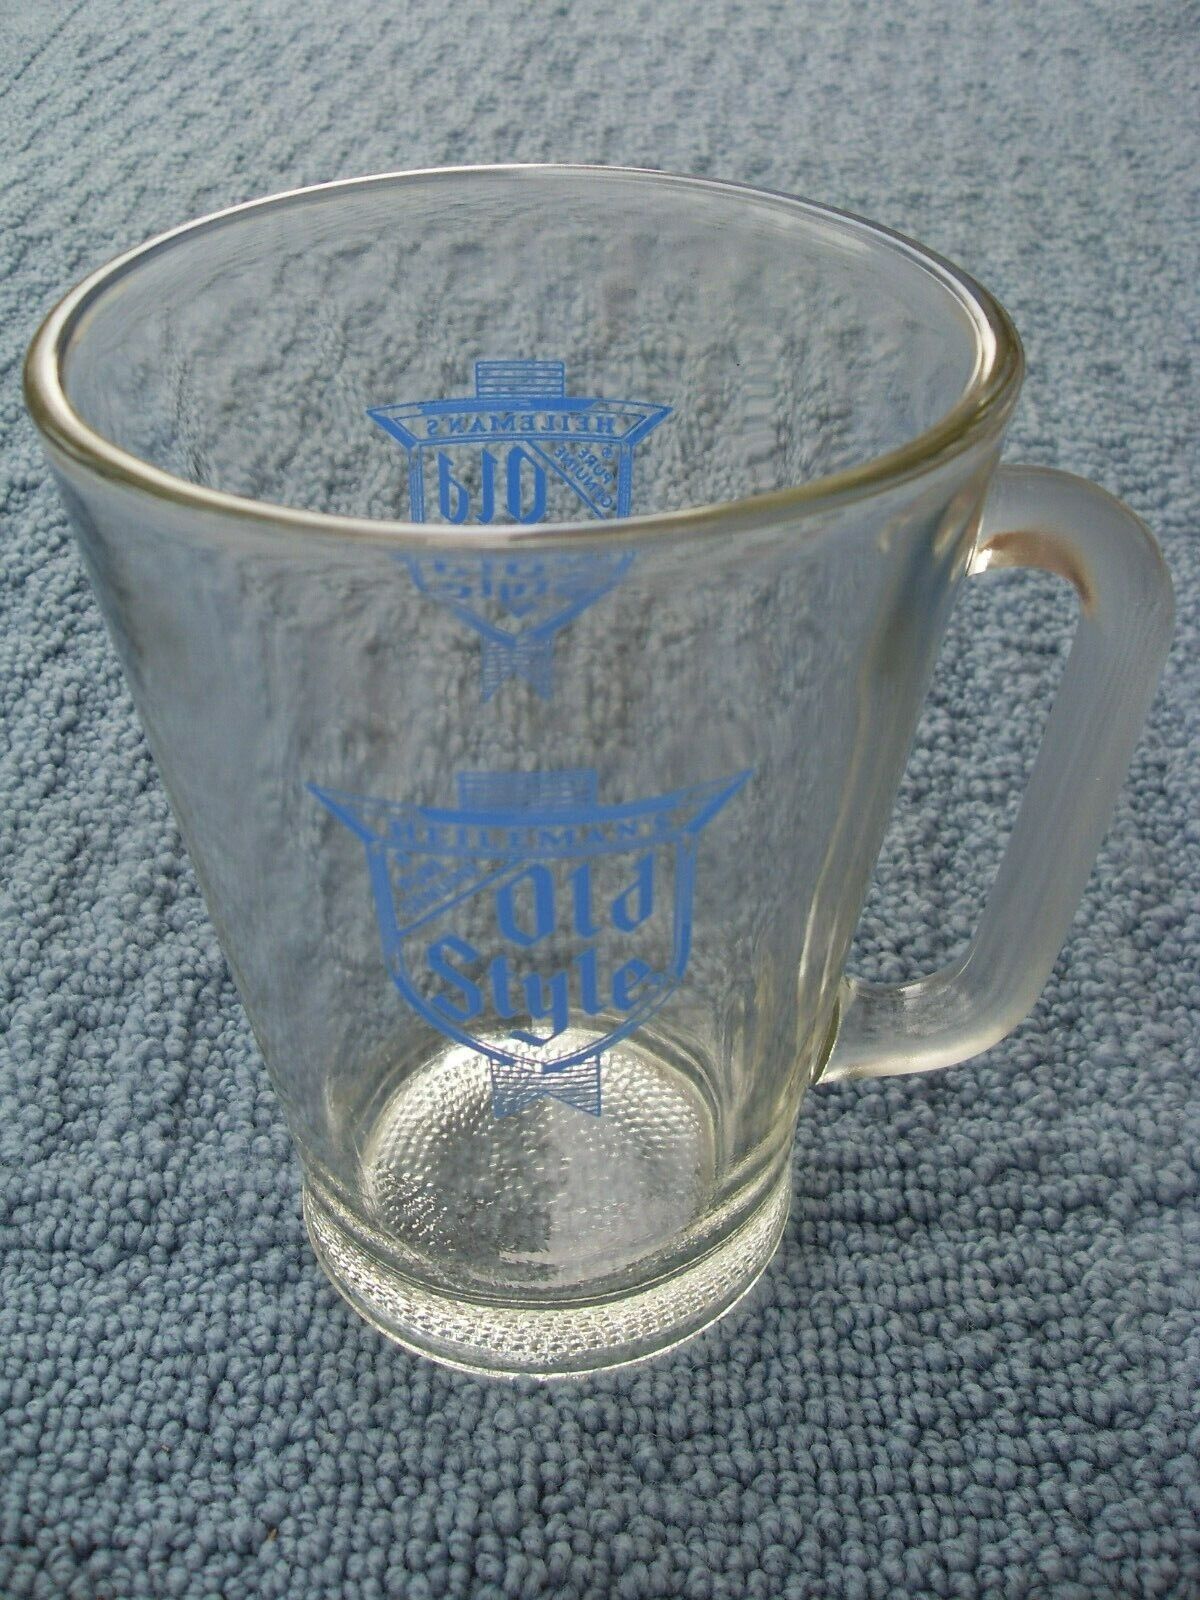 Rare Vintage 7" Heileman's Old Style Glass Beer Pitcher, Good Condition